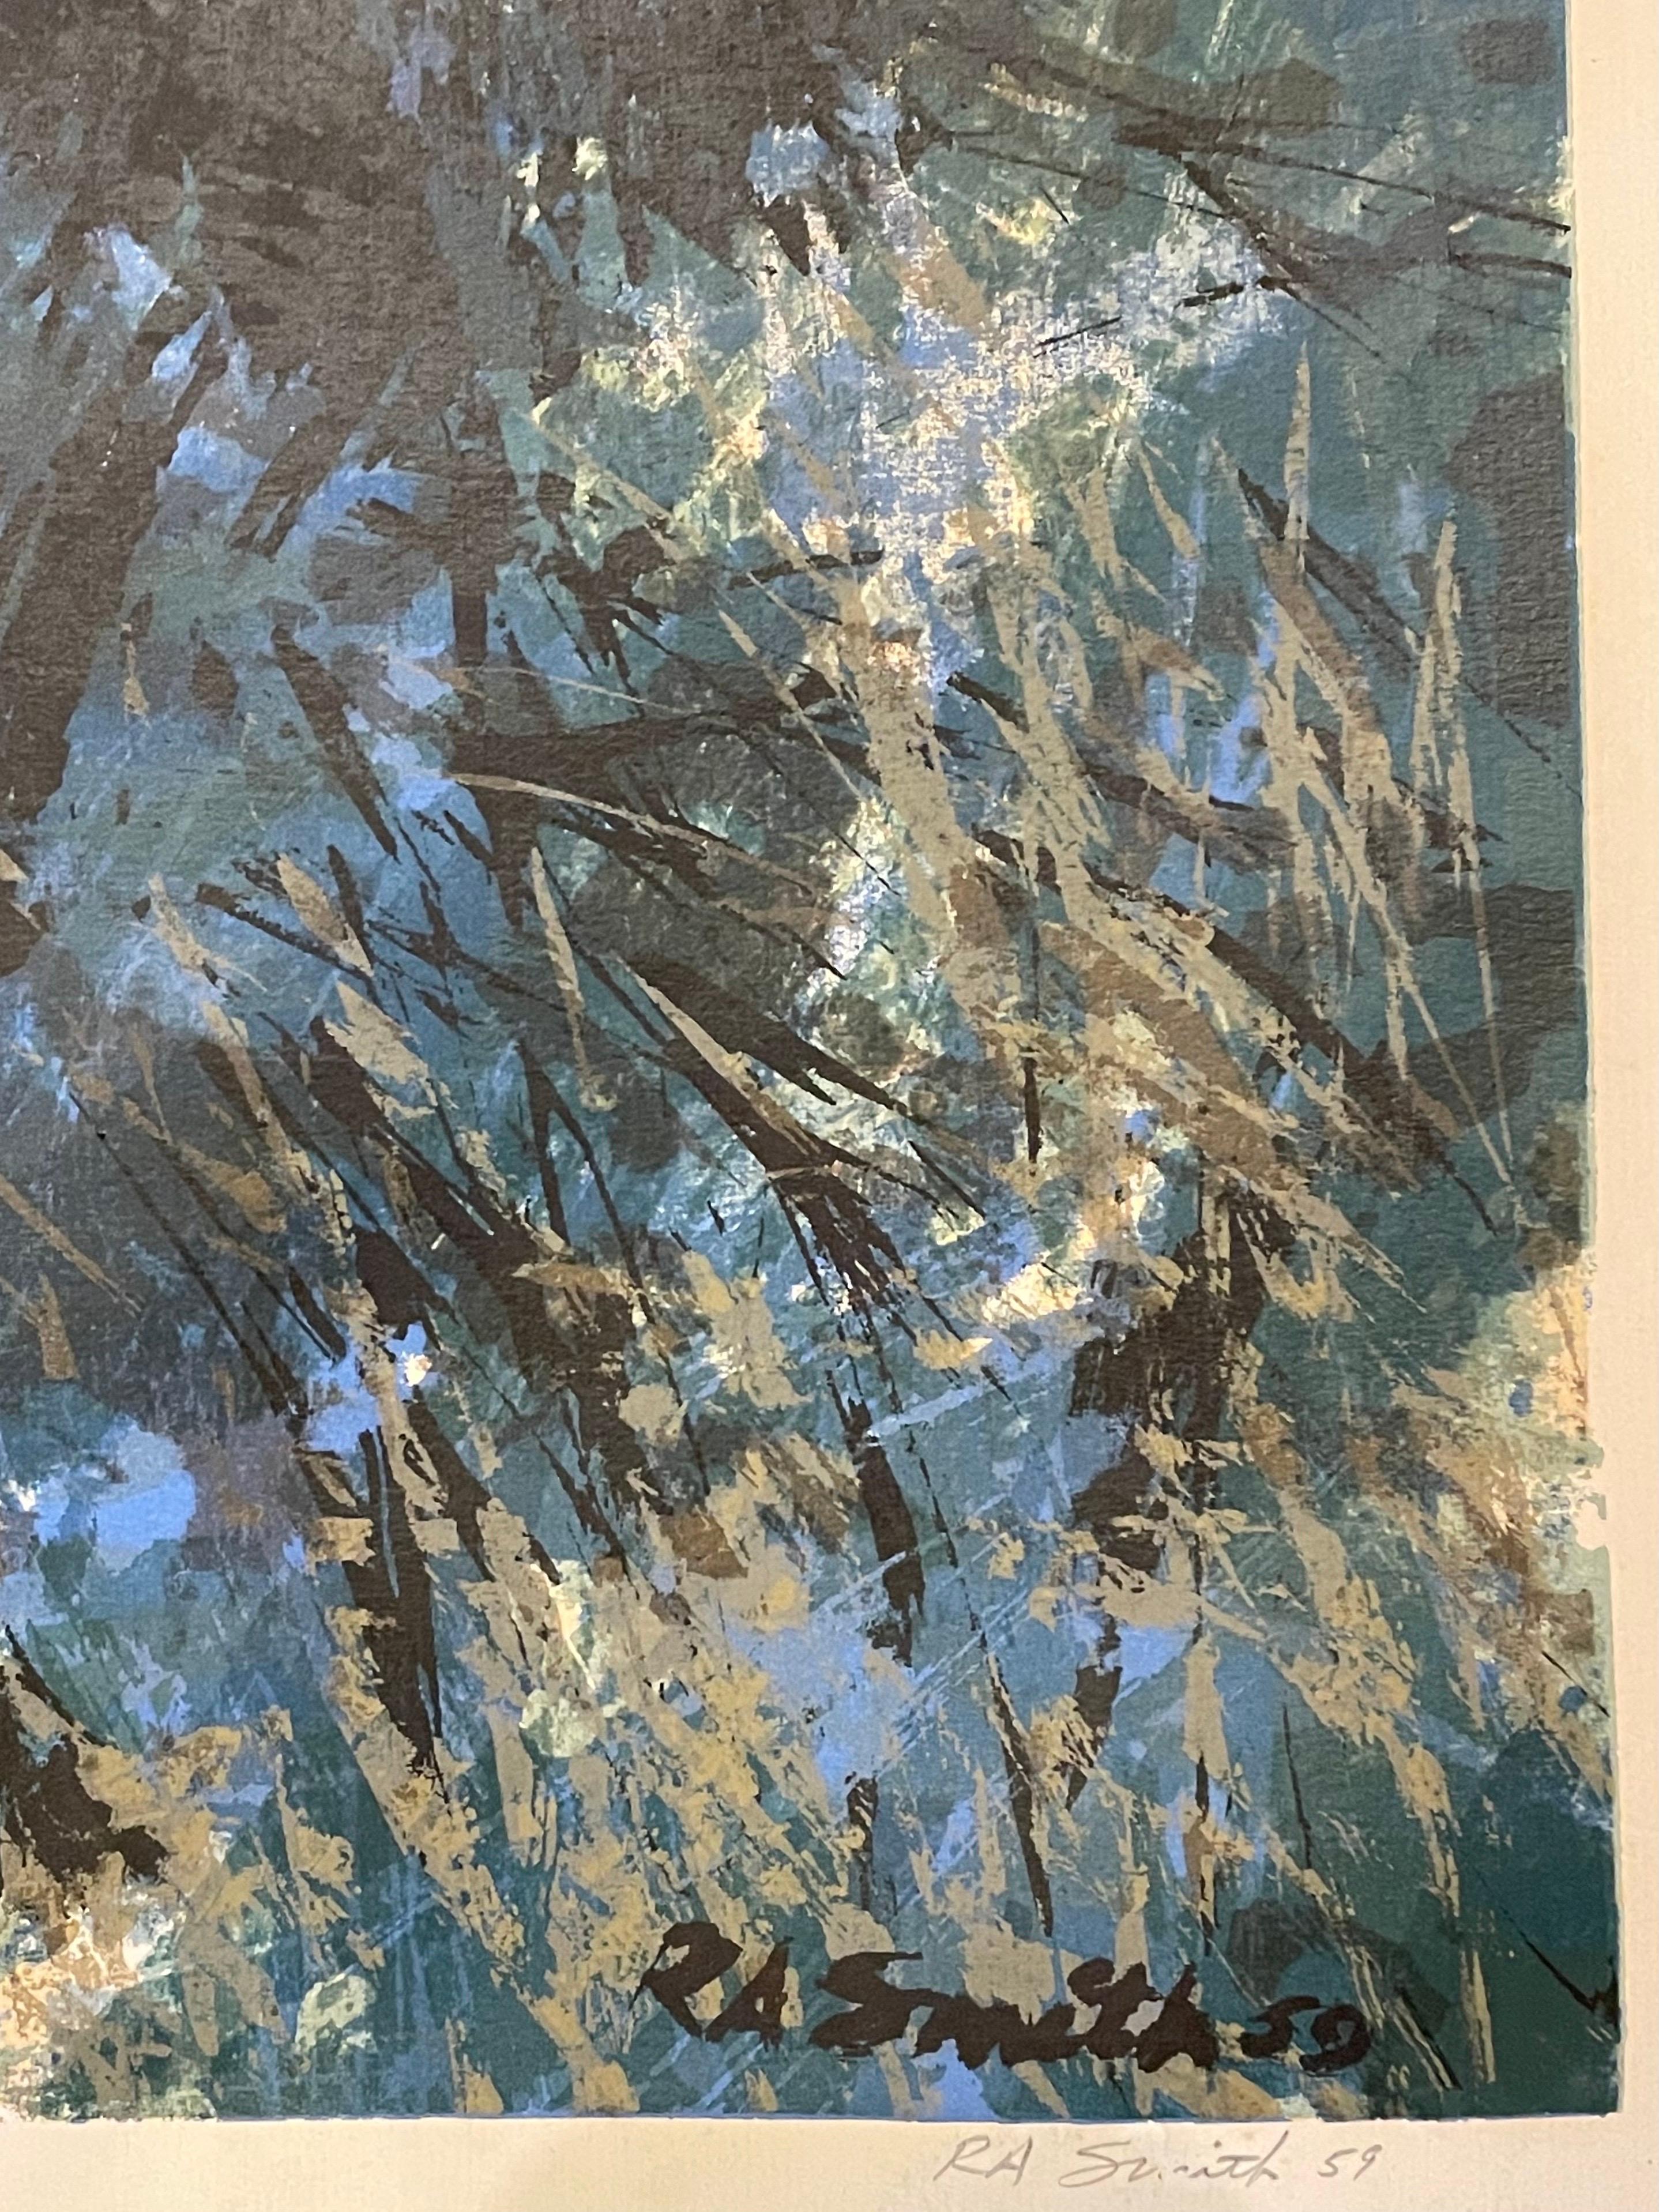 Large and rare signed and dated 1959 title Light in the Oaks, by listed artist Robert Alan Smith, unframed the condition its good with some stains on the edge as shown the color and signature are perfect and once it's framed you won't see anything.